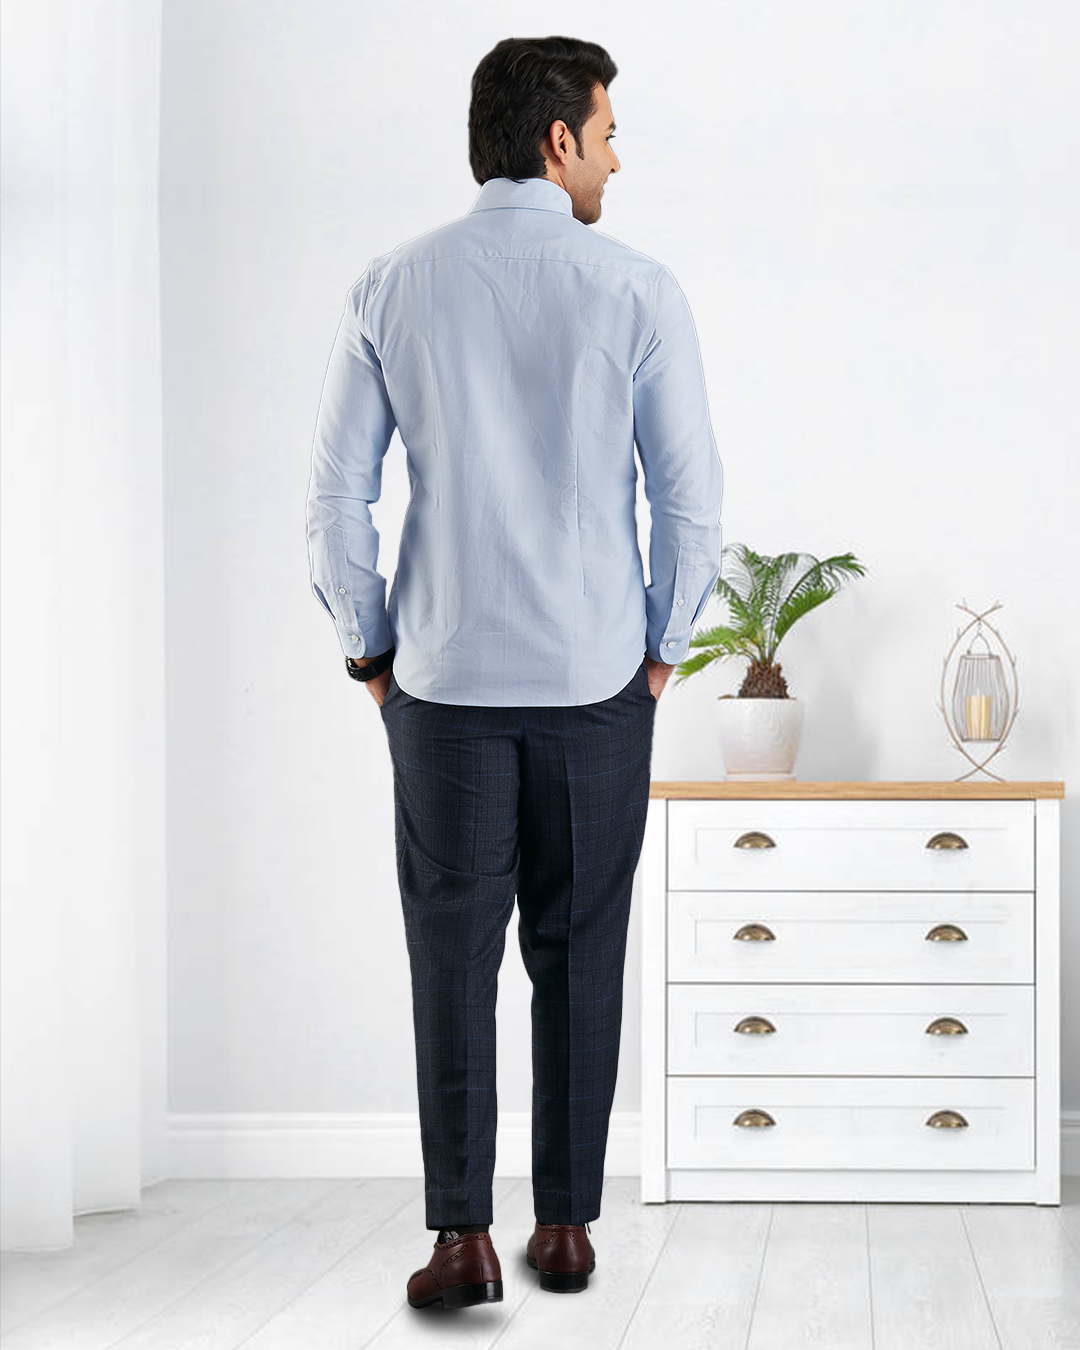 Back of model wearing the custom oxford shirt for men by Luxire in sky blue hands in pockets